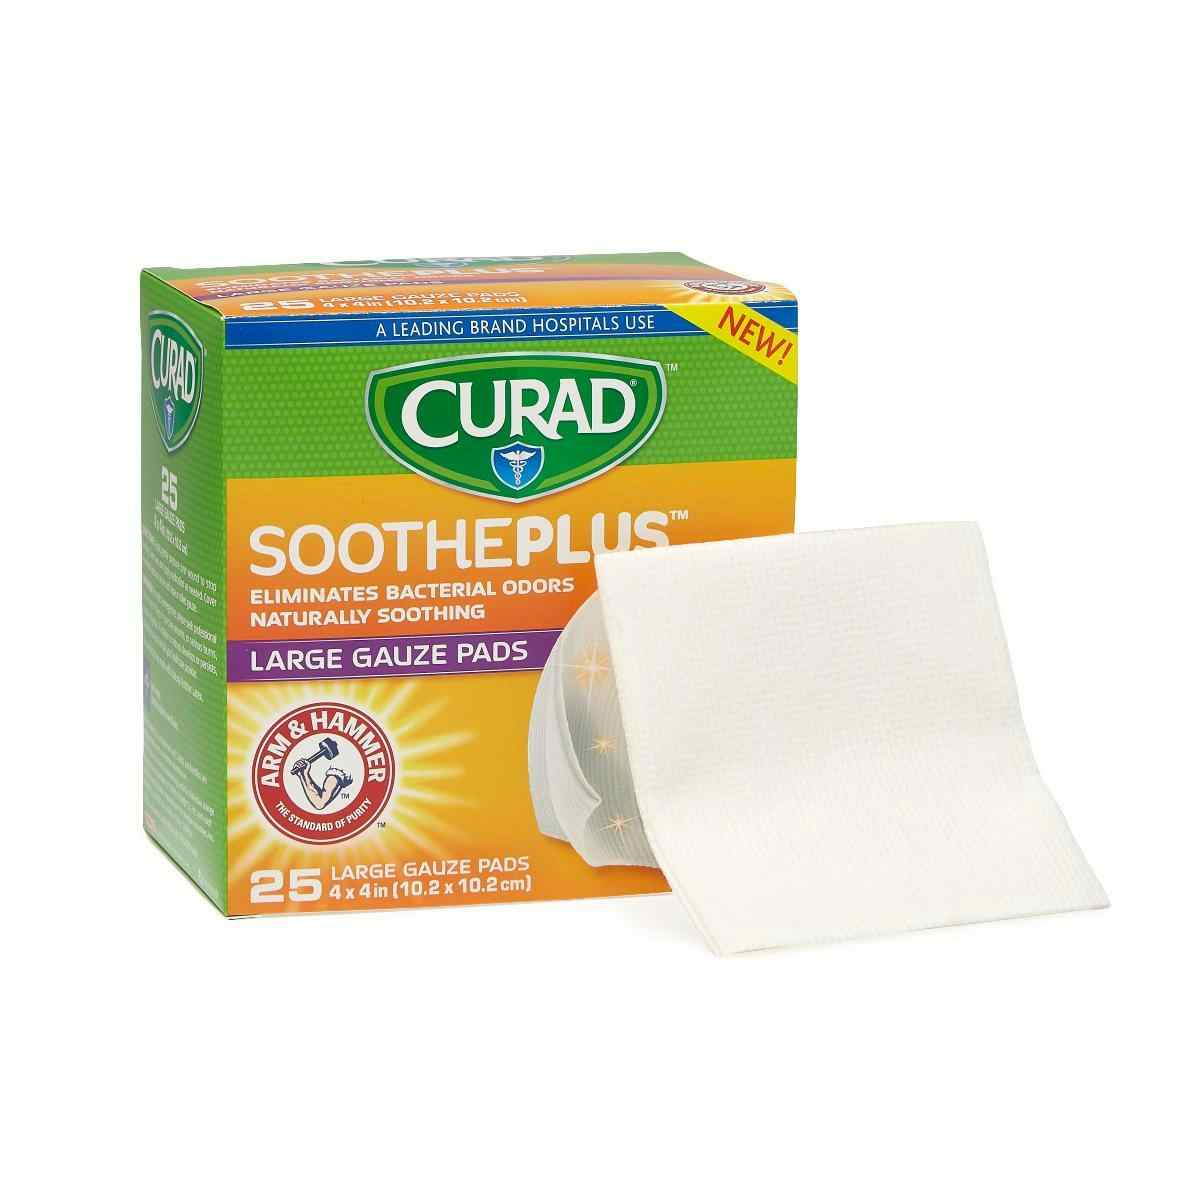 Curad SoothePlus Gauze Pads with Arm and Hammer, CUR204425AH, Large (4" X 4") - Case of 24 